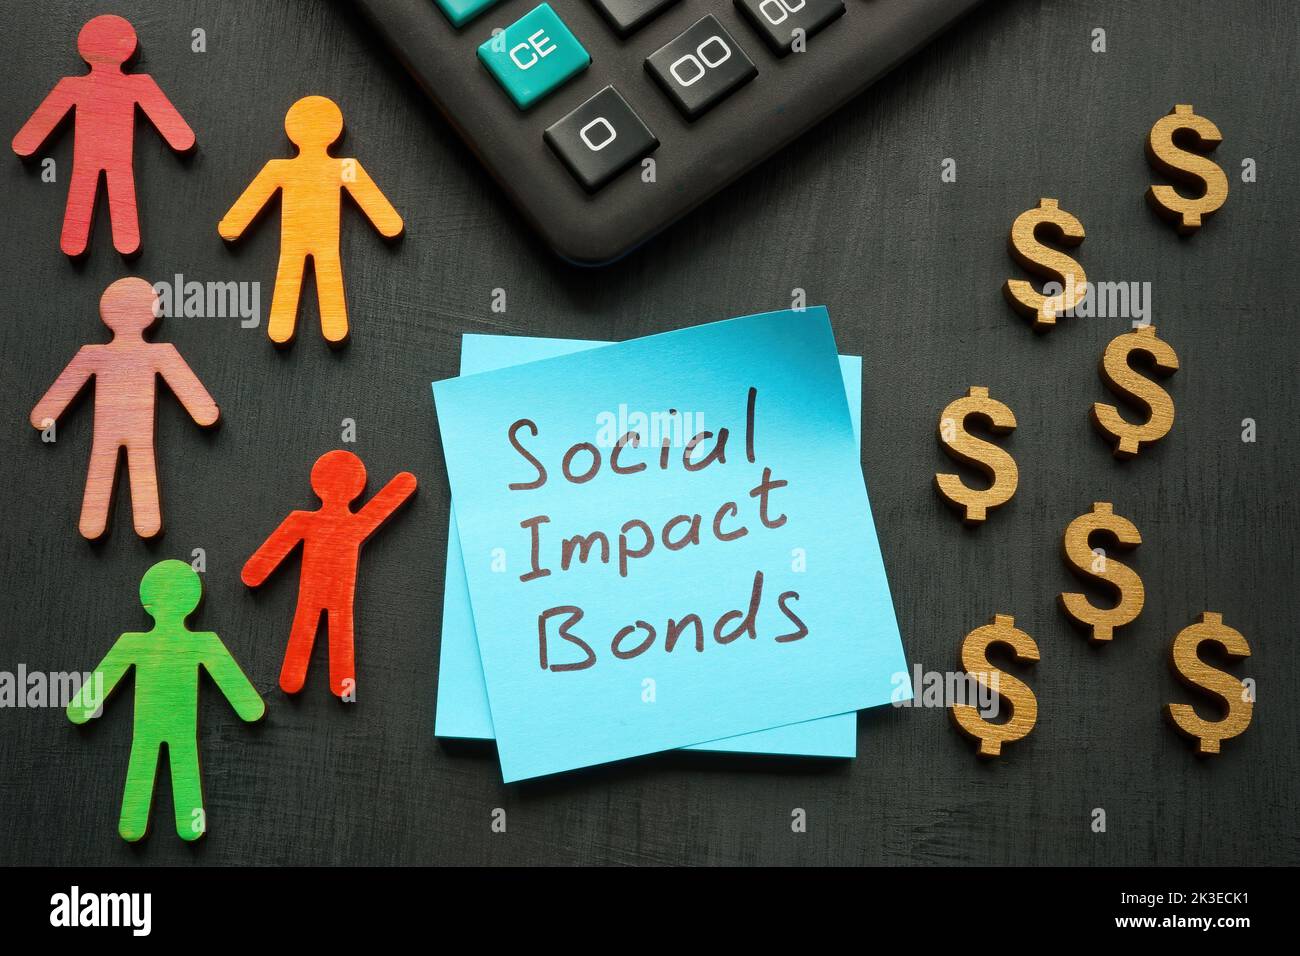 Social impact bonds sign, calculator and figurines. Stock Photo